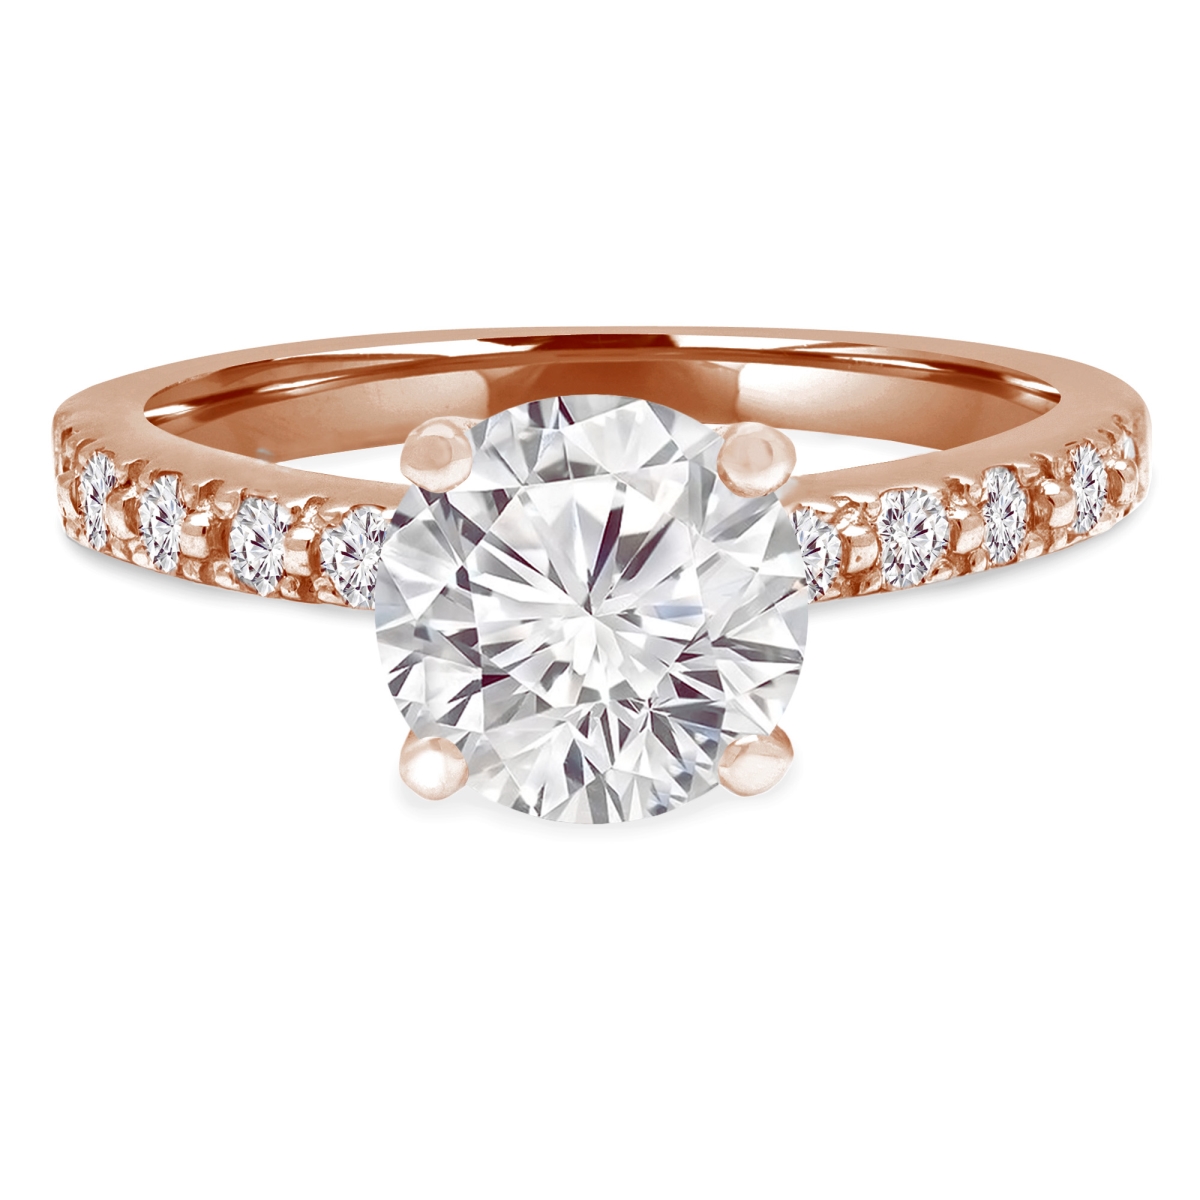 MD190449-3.25 0.75 CTW Round Diamond Solitaire with Accents Engagement Ring in 14K Rose Gold - Size 3.25